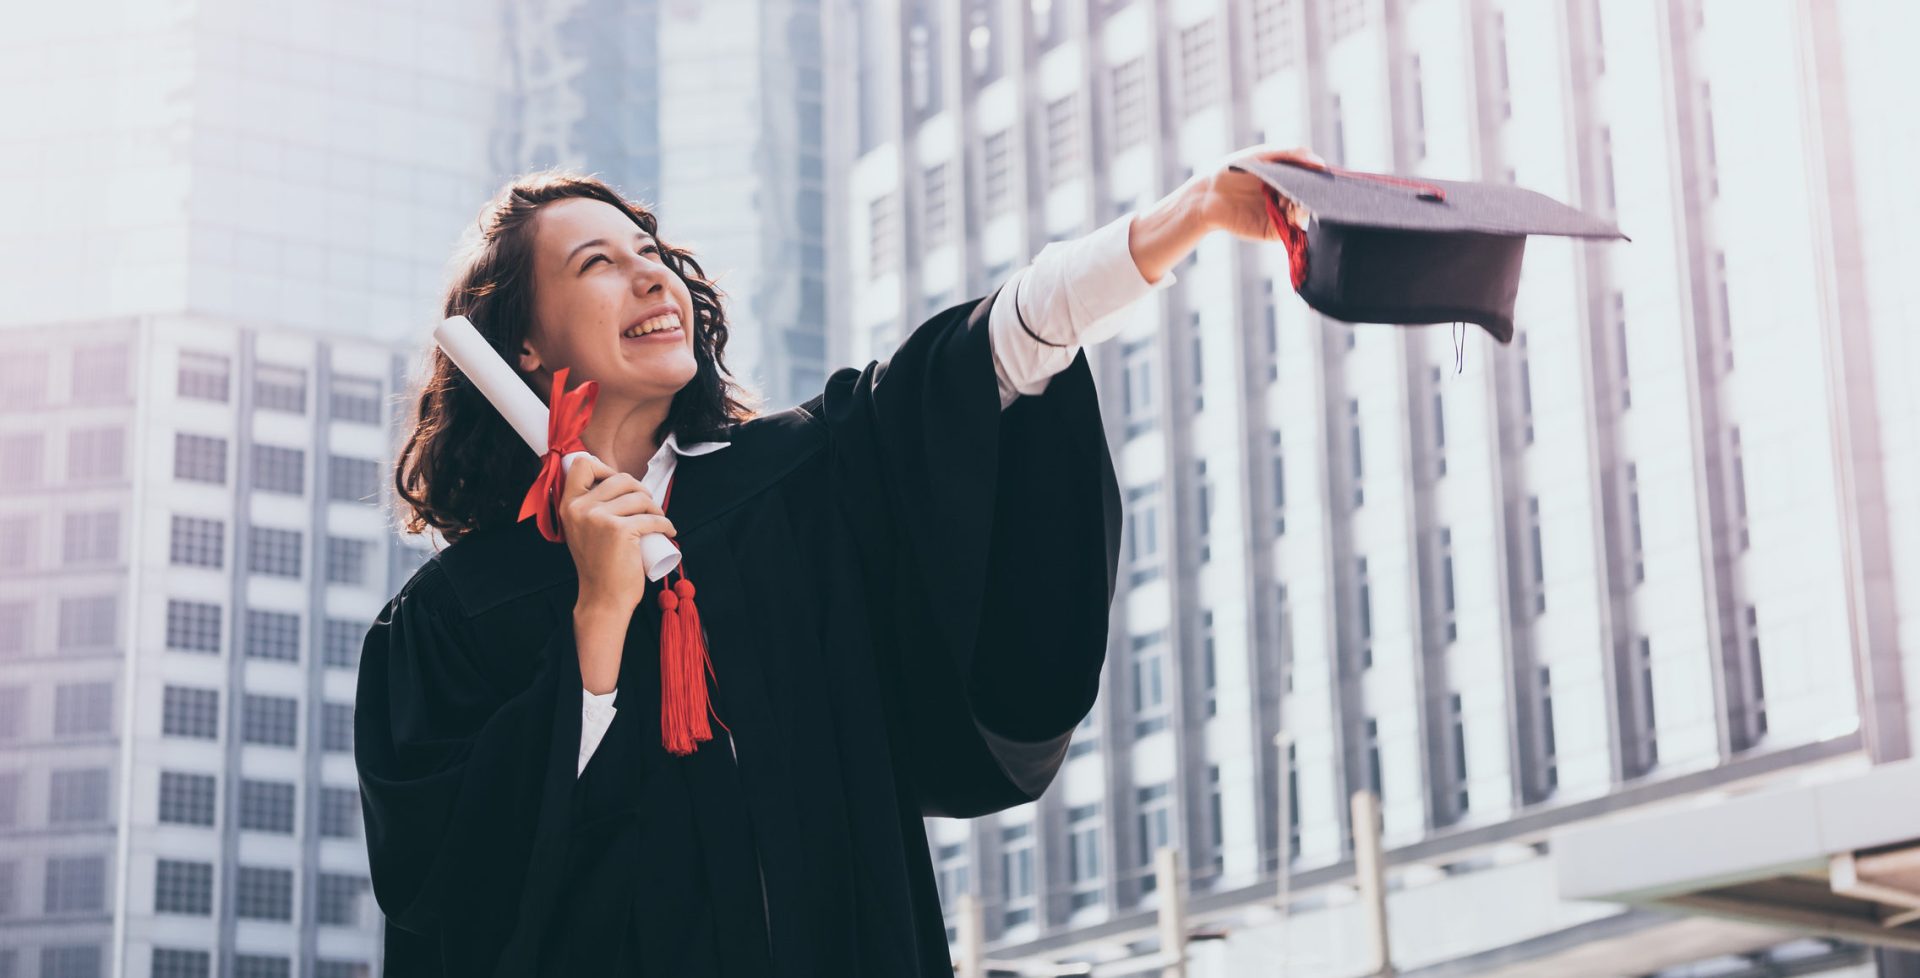 Graduation day, Young woman with graduation cap and gown holding diploma, Successful concept